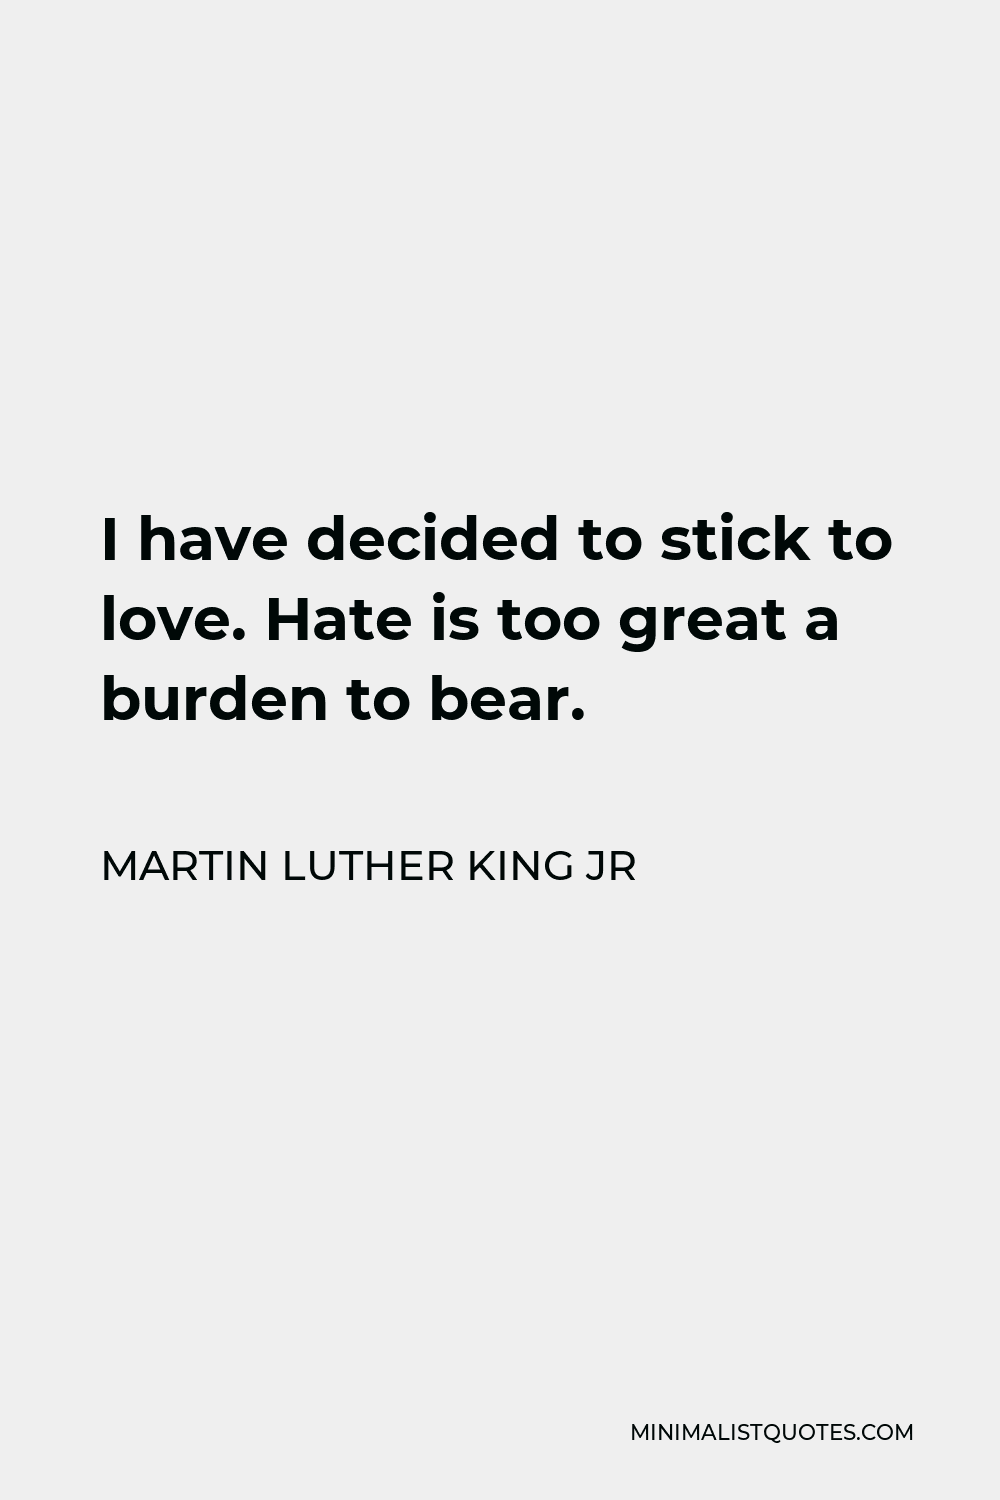 Martin Luther King Jr Quote - I have decided to stick to love. Hate is too great a burden to bear.